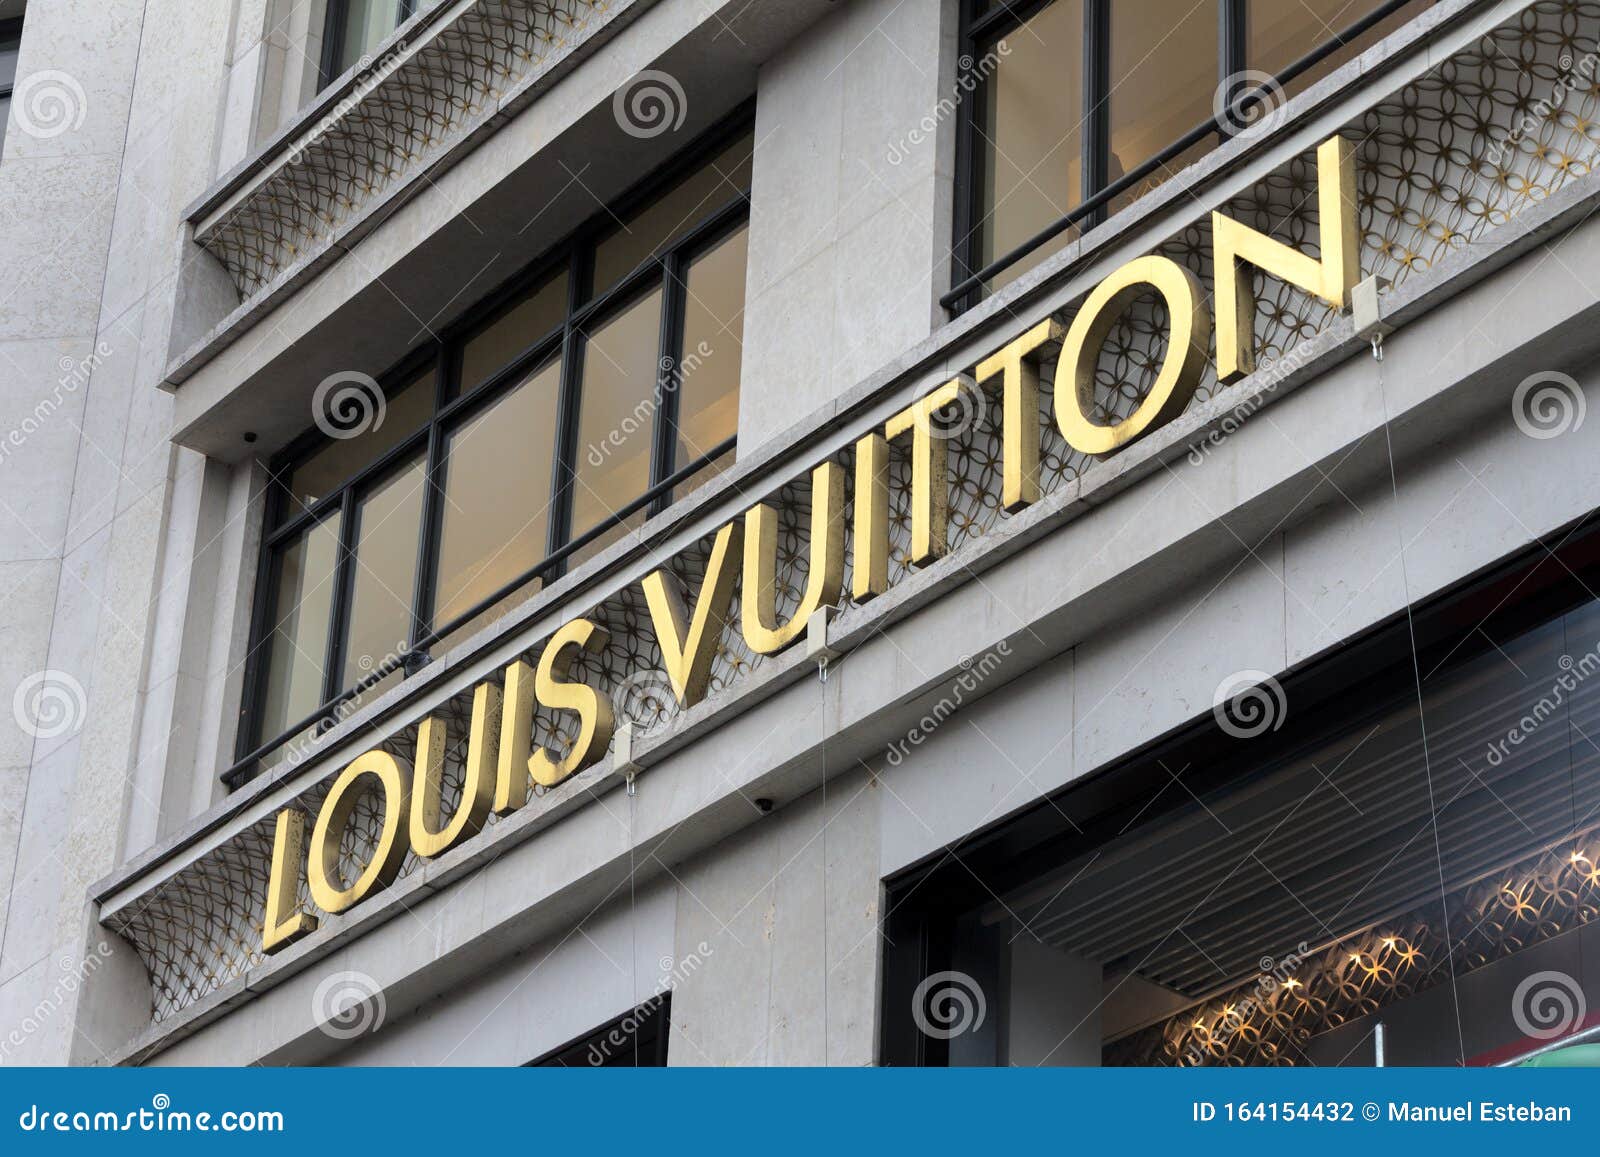 Louis Vuitton Logo On Louis Vuitton Store Editorial Photography - Image of sale, clothes: 164154432